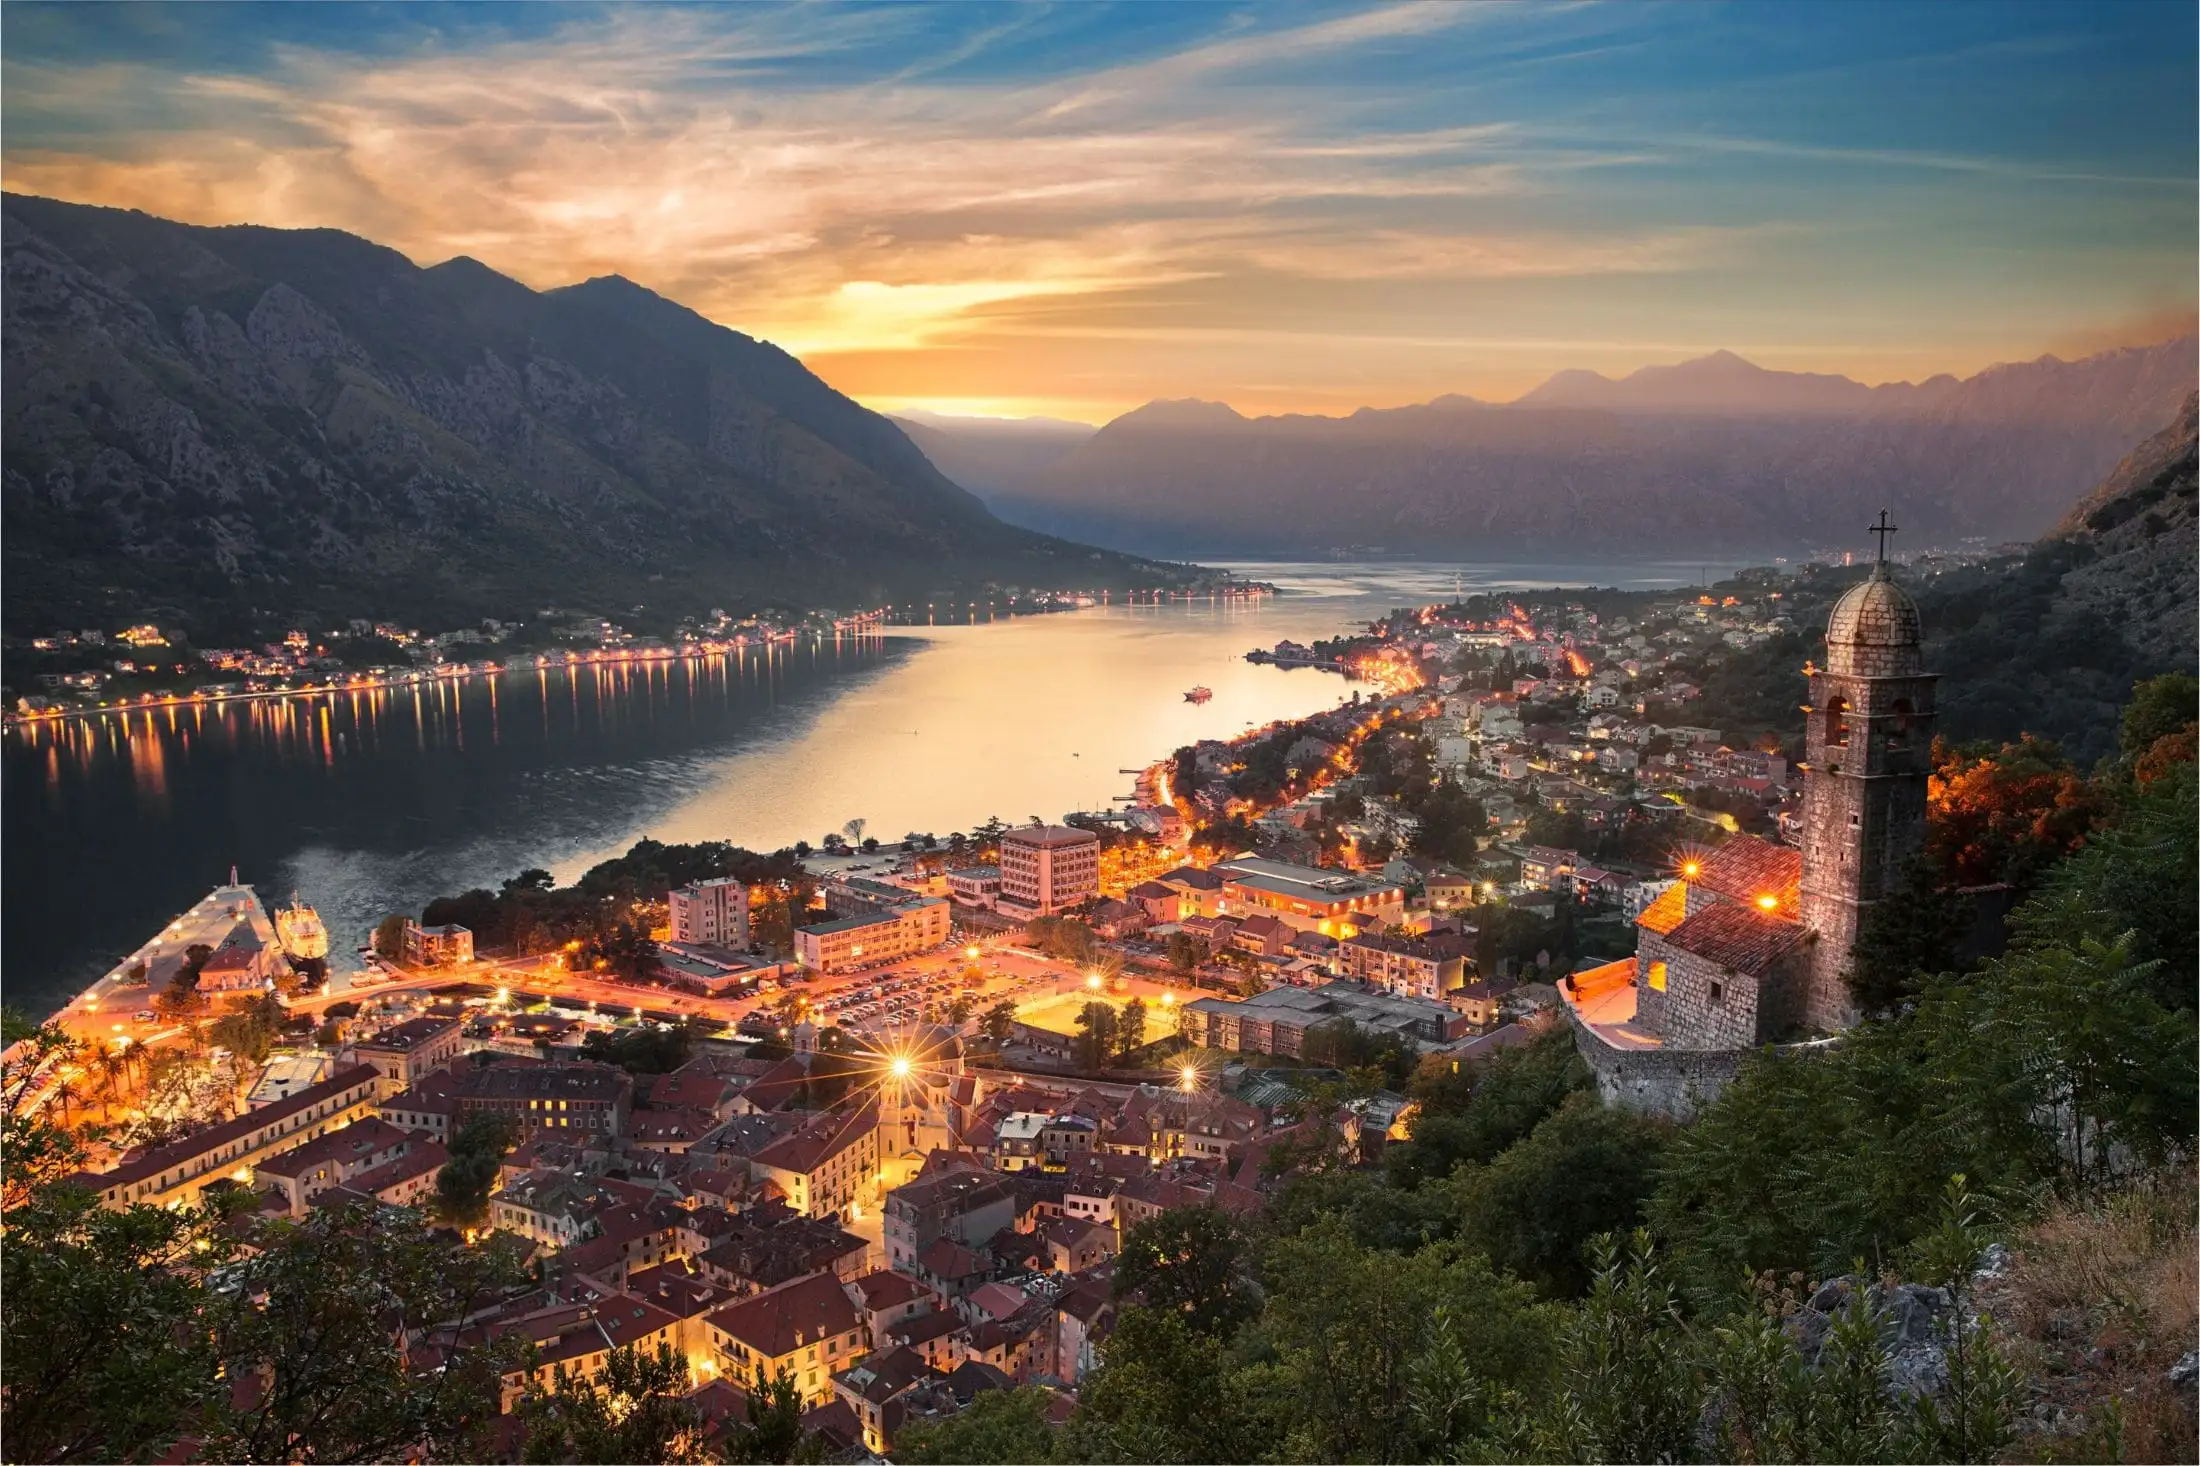 A photo of Kotor in the evening